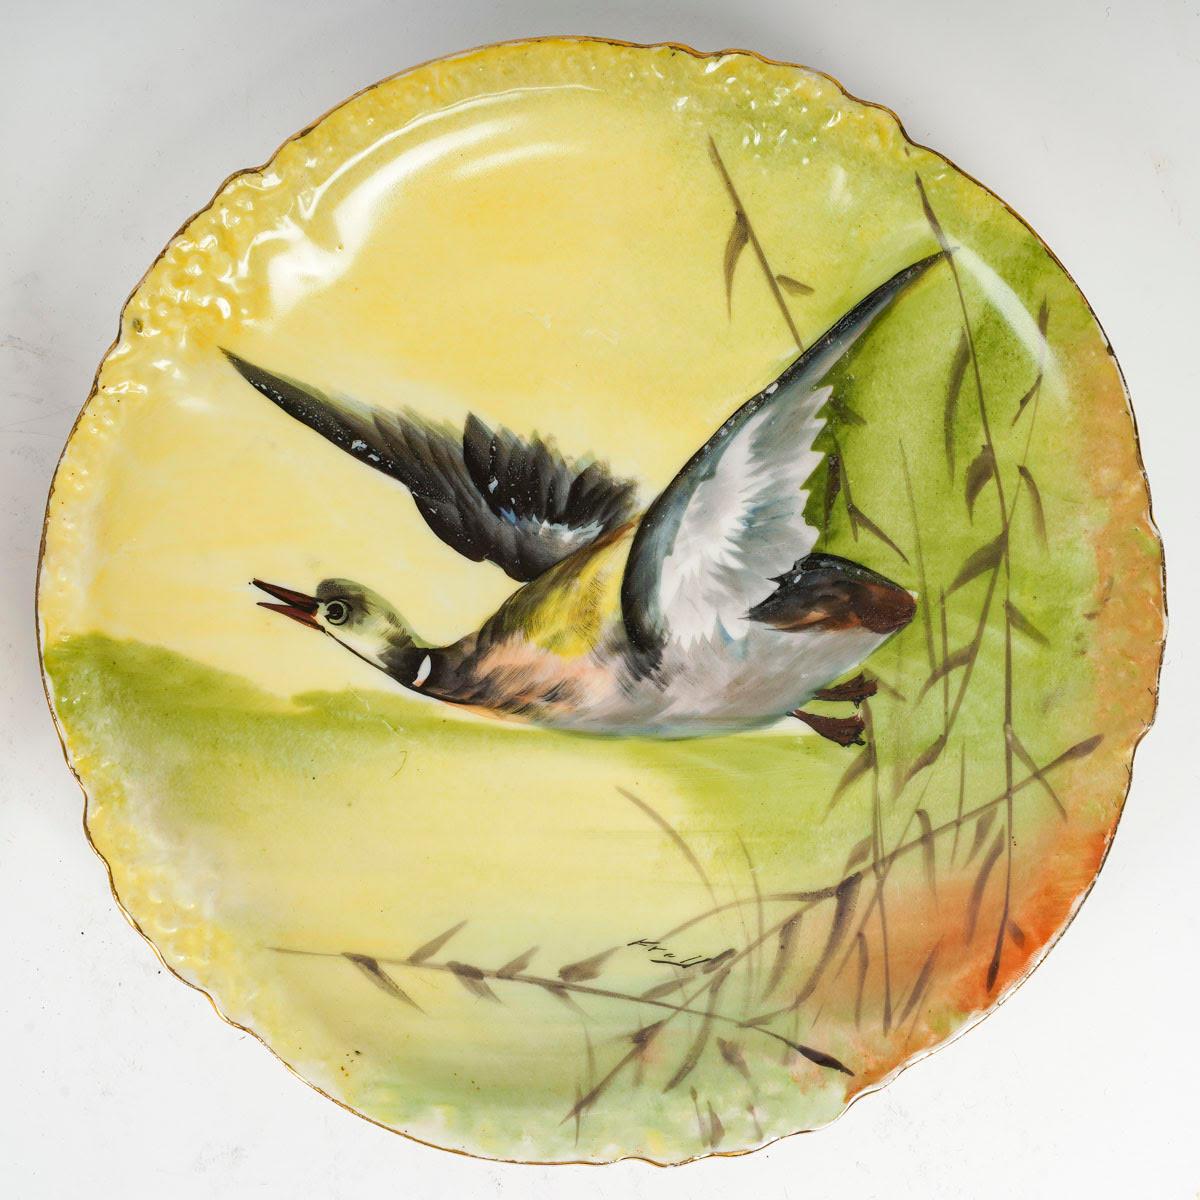 Pair of decorative plates in Limoges porcelain, 19th century, Napoleon III period.

A pair of Limoges porcelain decorative plates with ducks in flight, signed, 19th century, Napoleon III period.
D: 24,5cm, h: 3cm